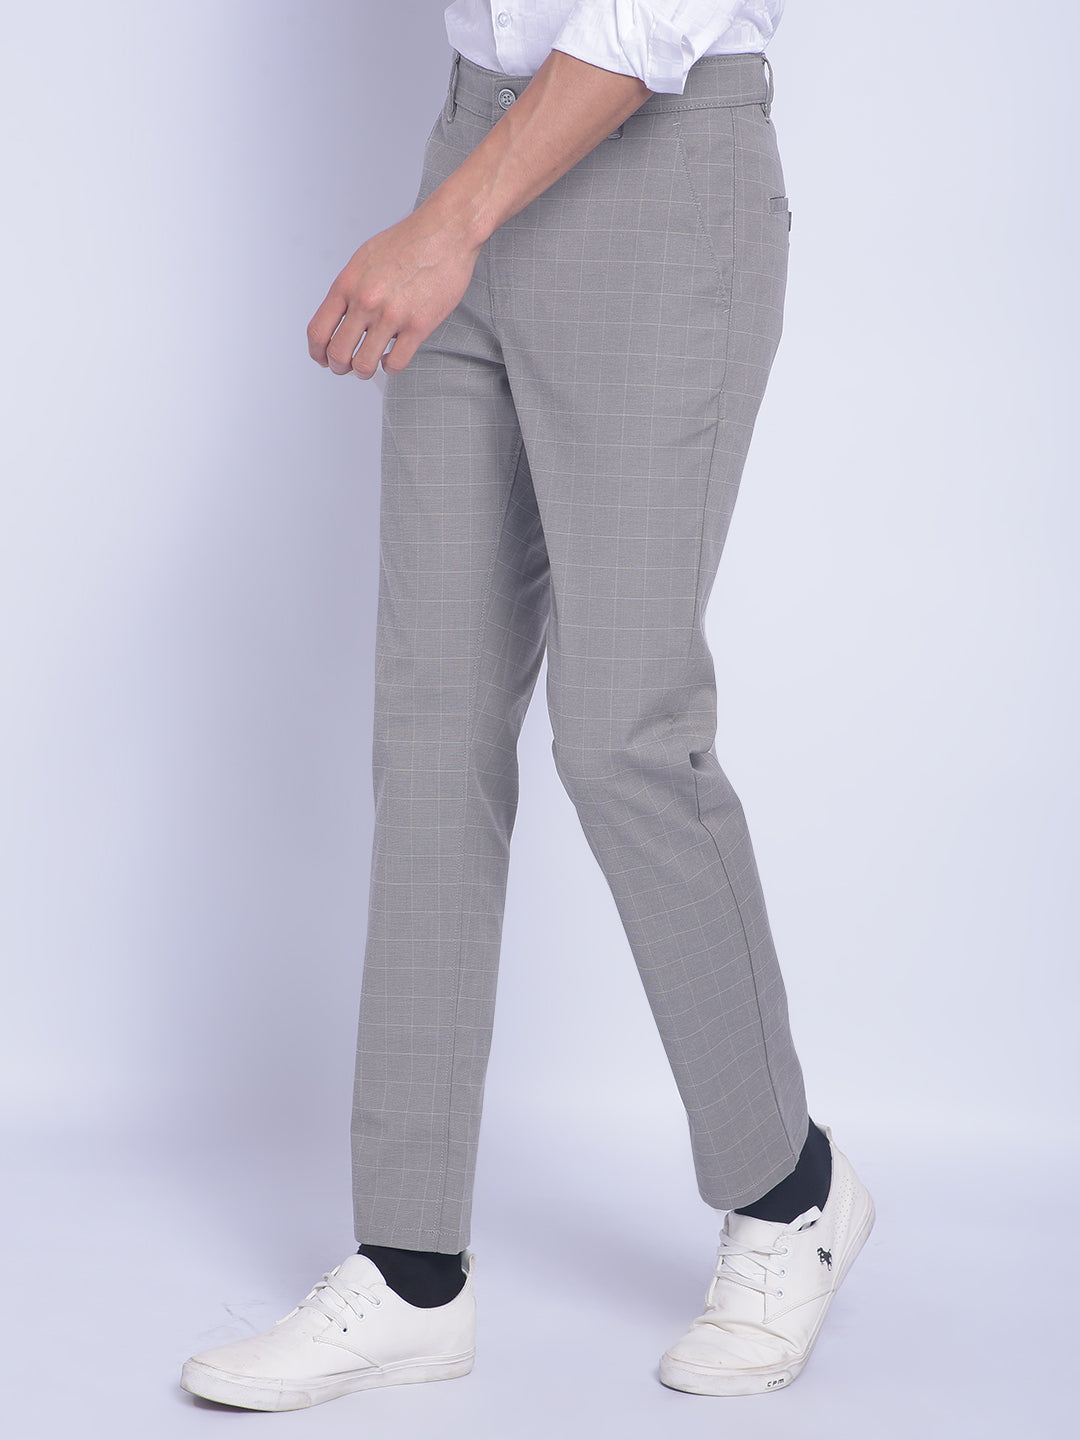 Grey Checked Trousers-Men Trousers-Crimsoune Club